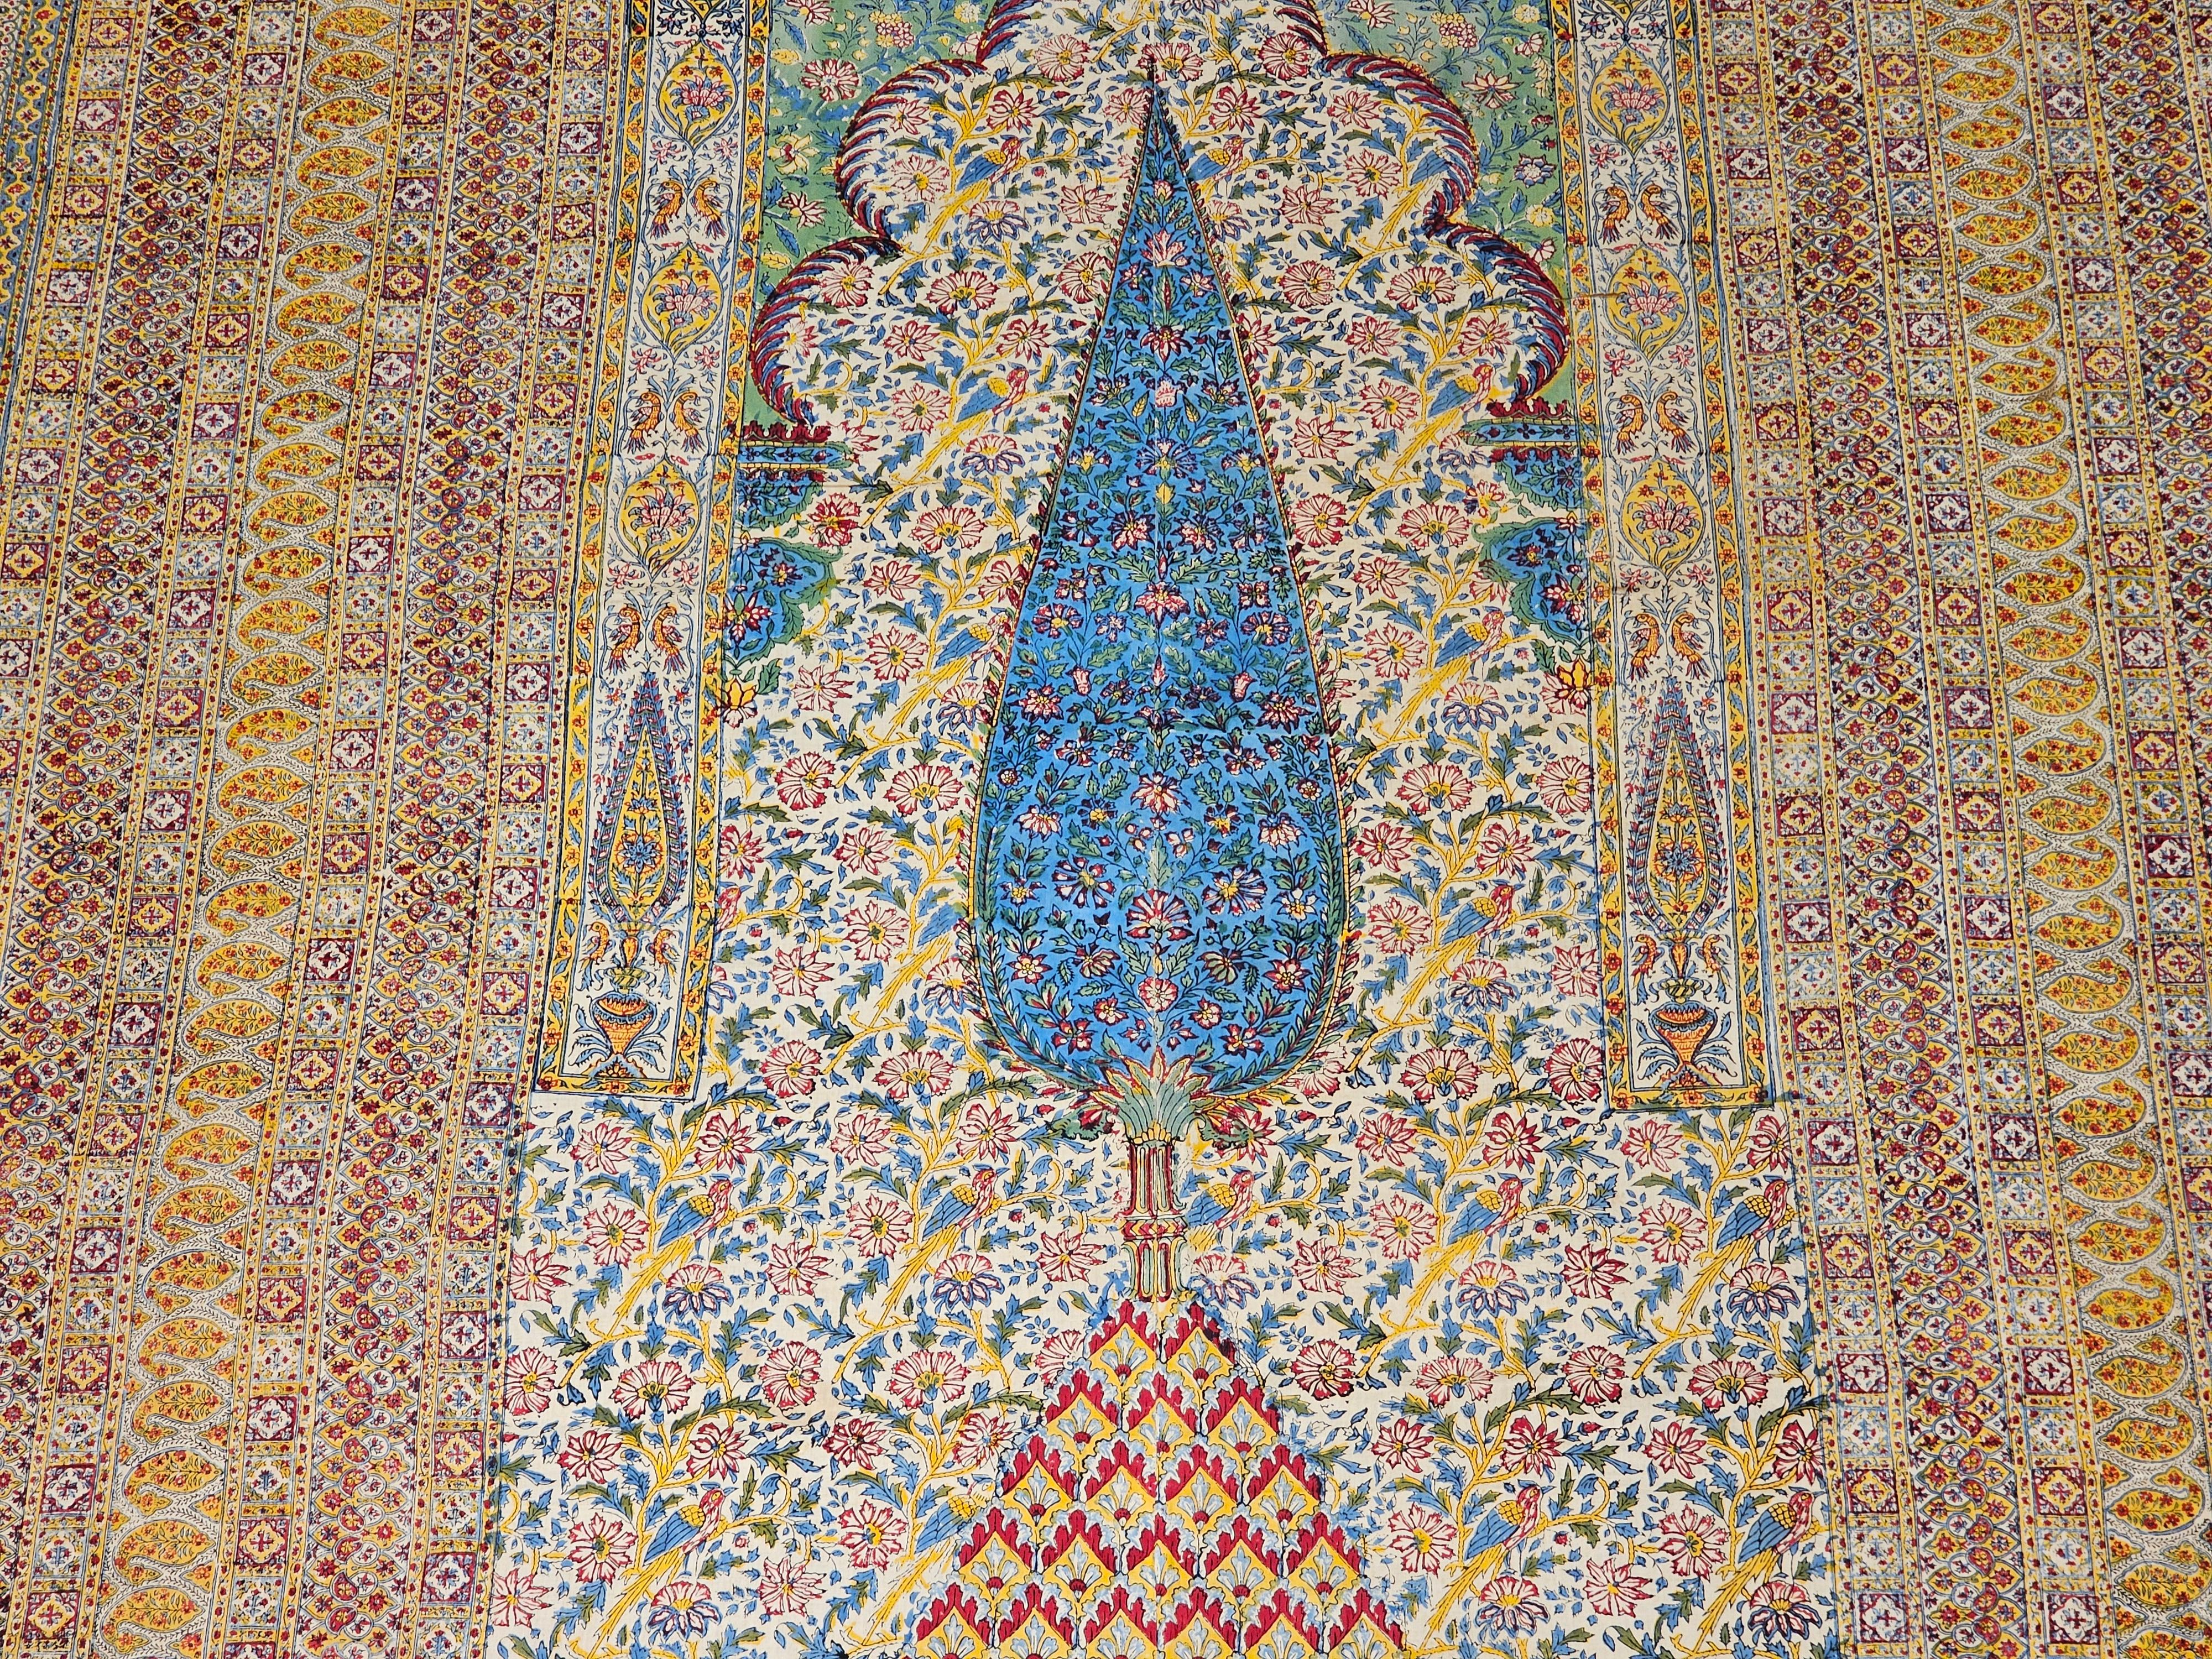 Vintage Persian Block Print (Kalamkari) Textile in Ivory, Yellow, Green, Blue In Good Condition For Sale In Barrington, IL